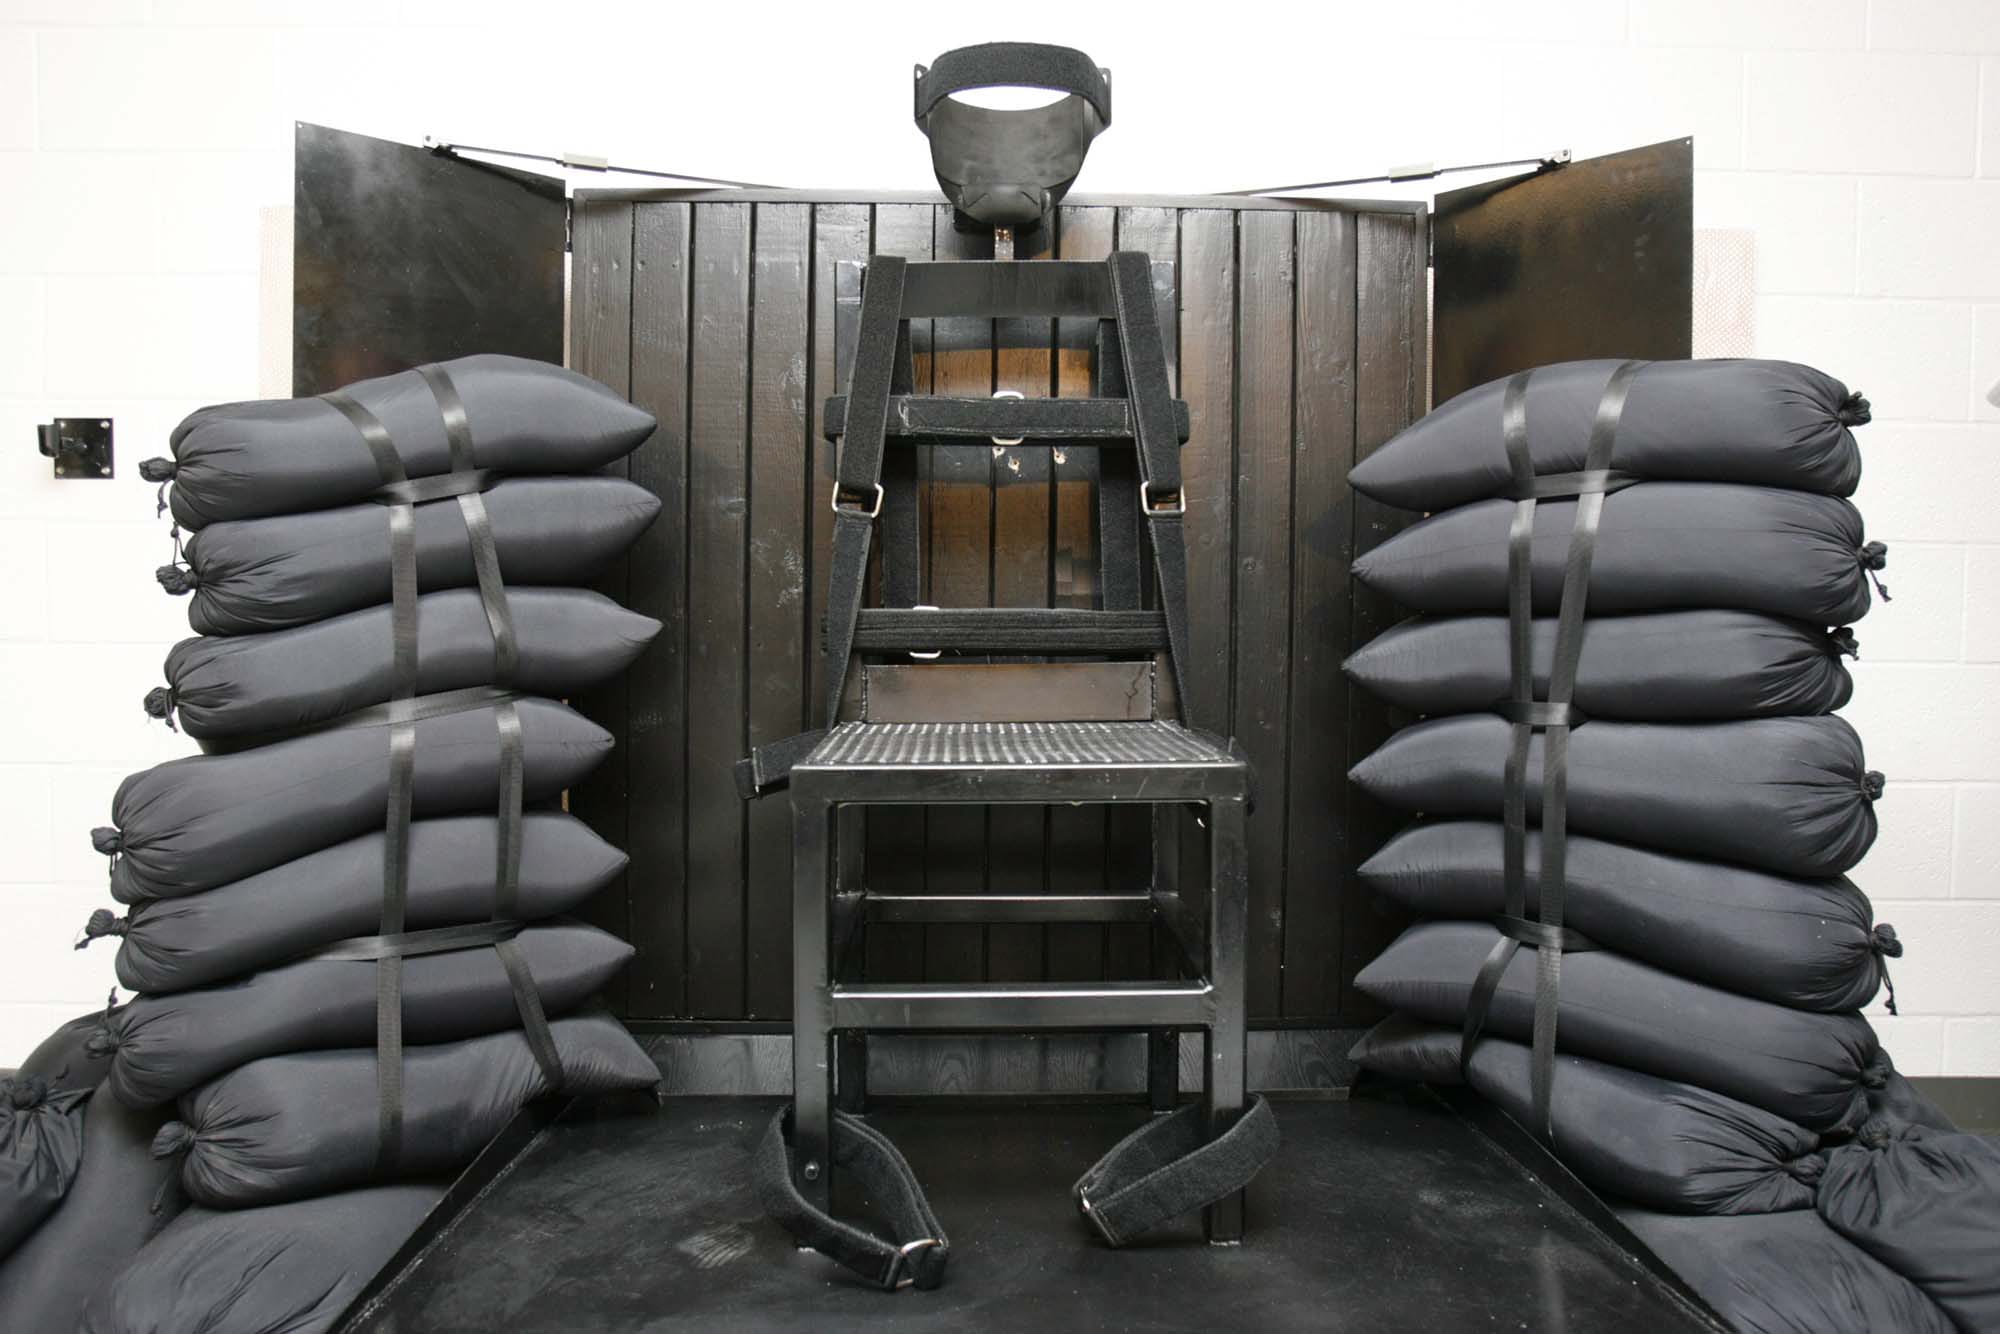 The firing squad execution chamber at the Utah State Prison in Draper, Utah, is shown.